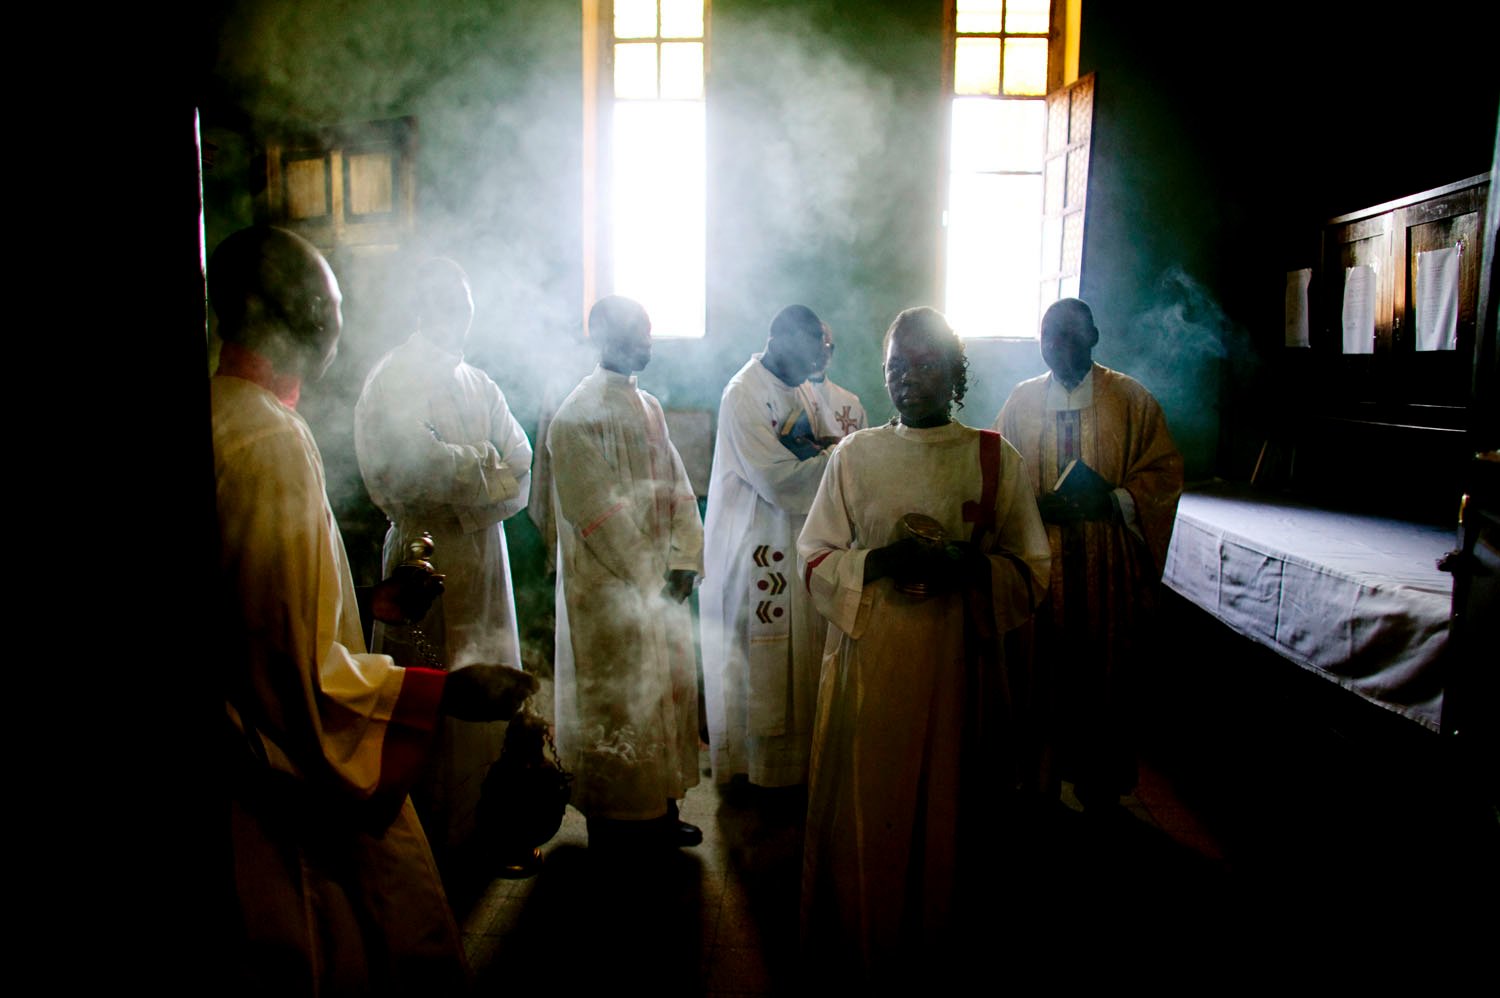  Southern Sudanese Catholics prepare for Easter mass in Wau, the south’s second largest city. Christianity is a vital component of southern identity and was significant source of conflict between southern tribes and the northern, Islamic government i